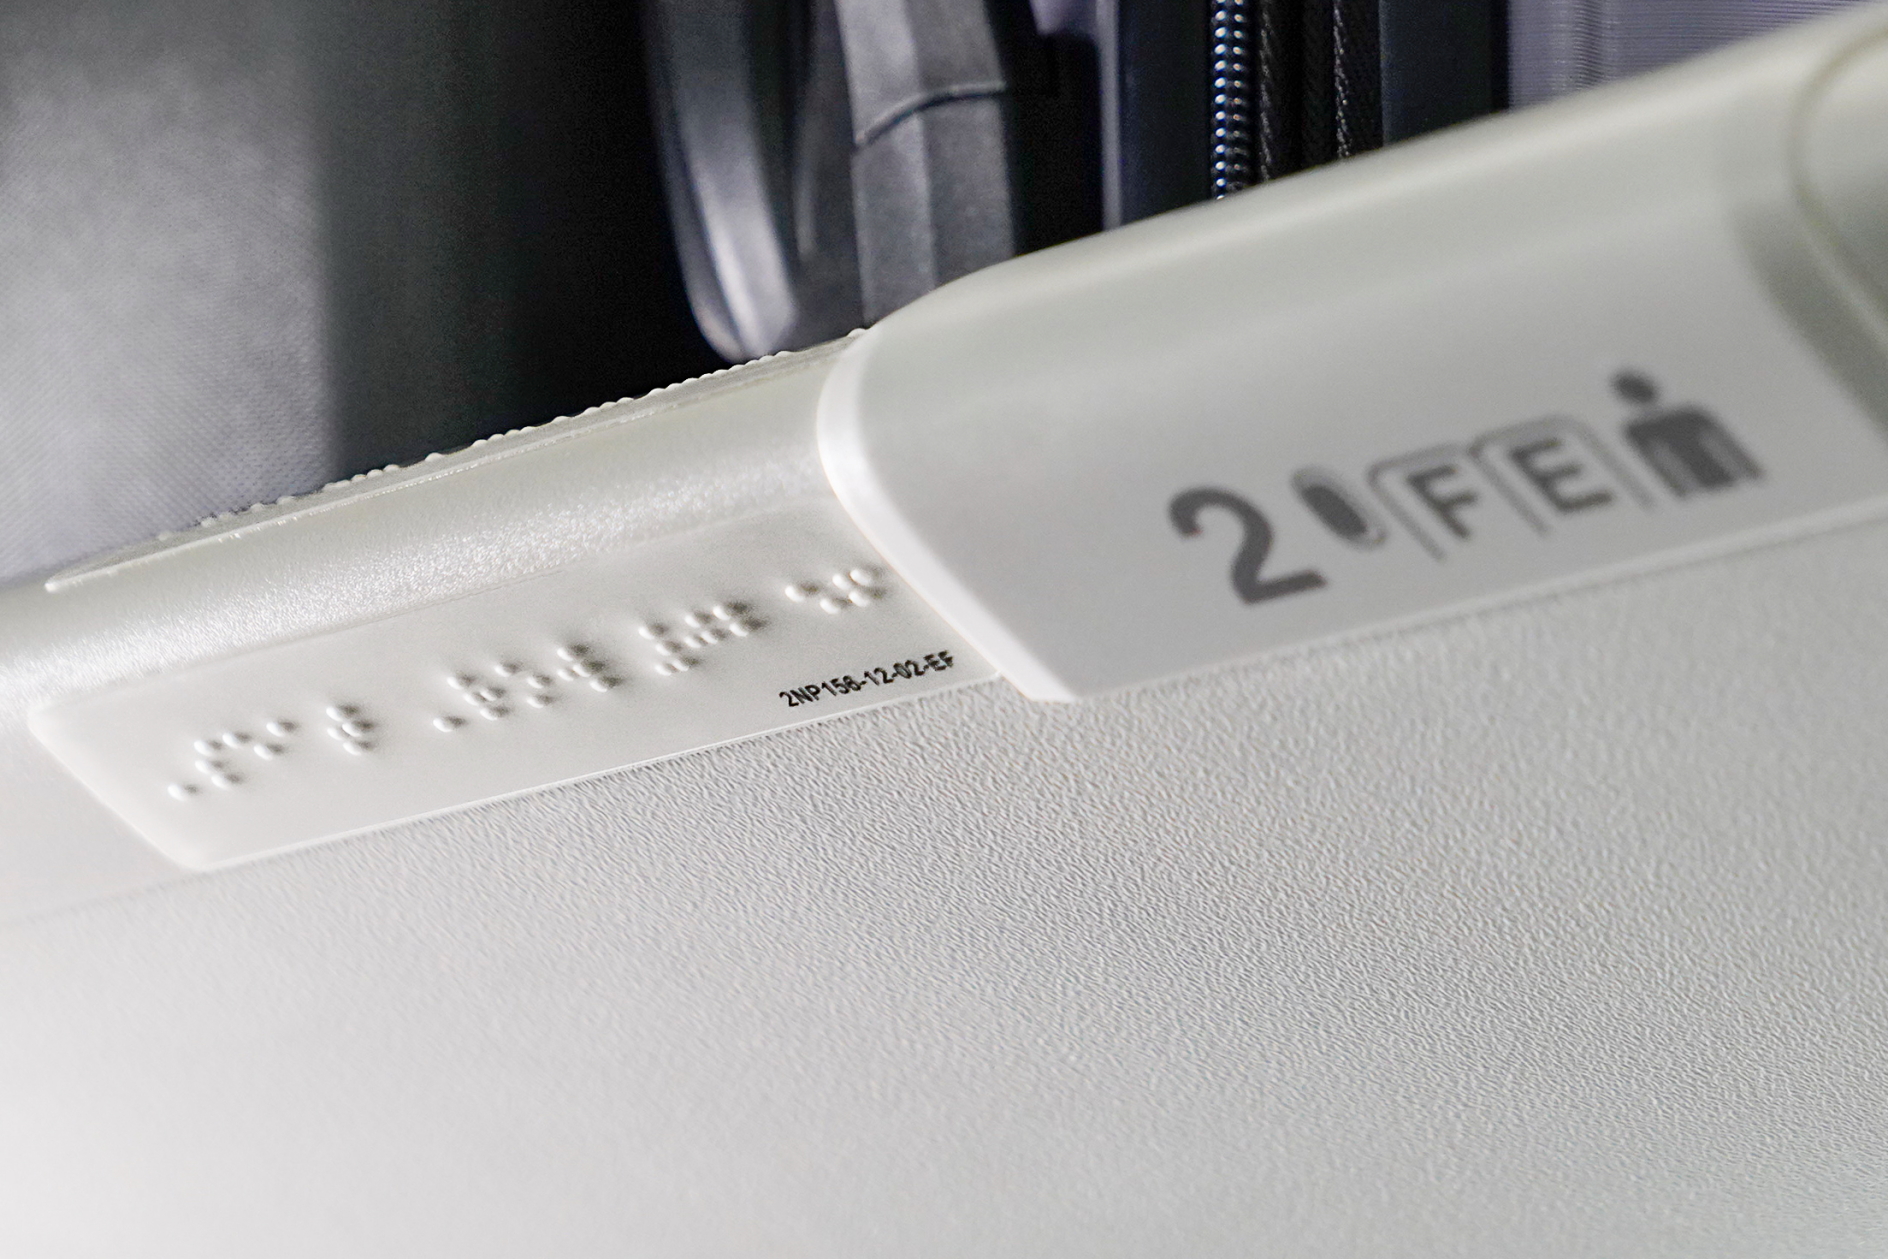 United expects to outfit its entire mainline fleet with Braille by the end of 2026.. Click to enlarge.